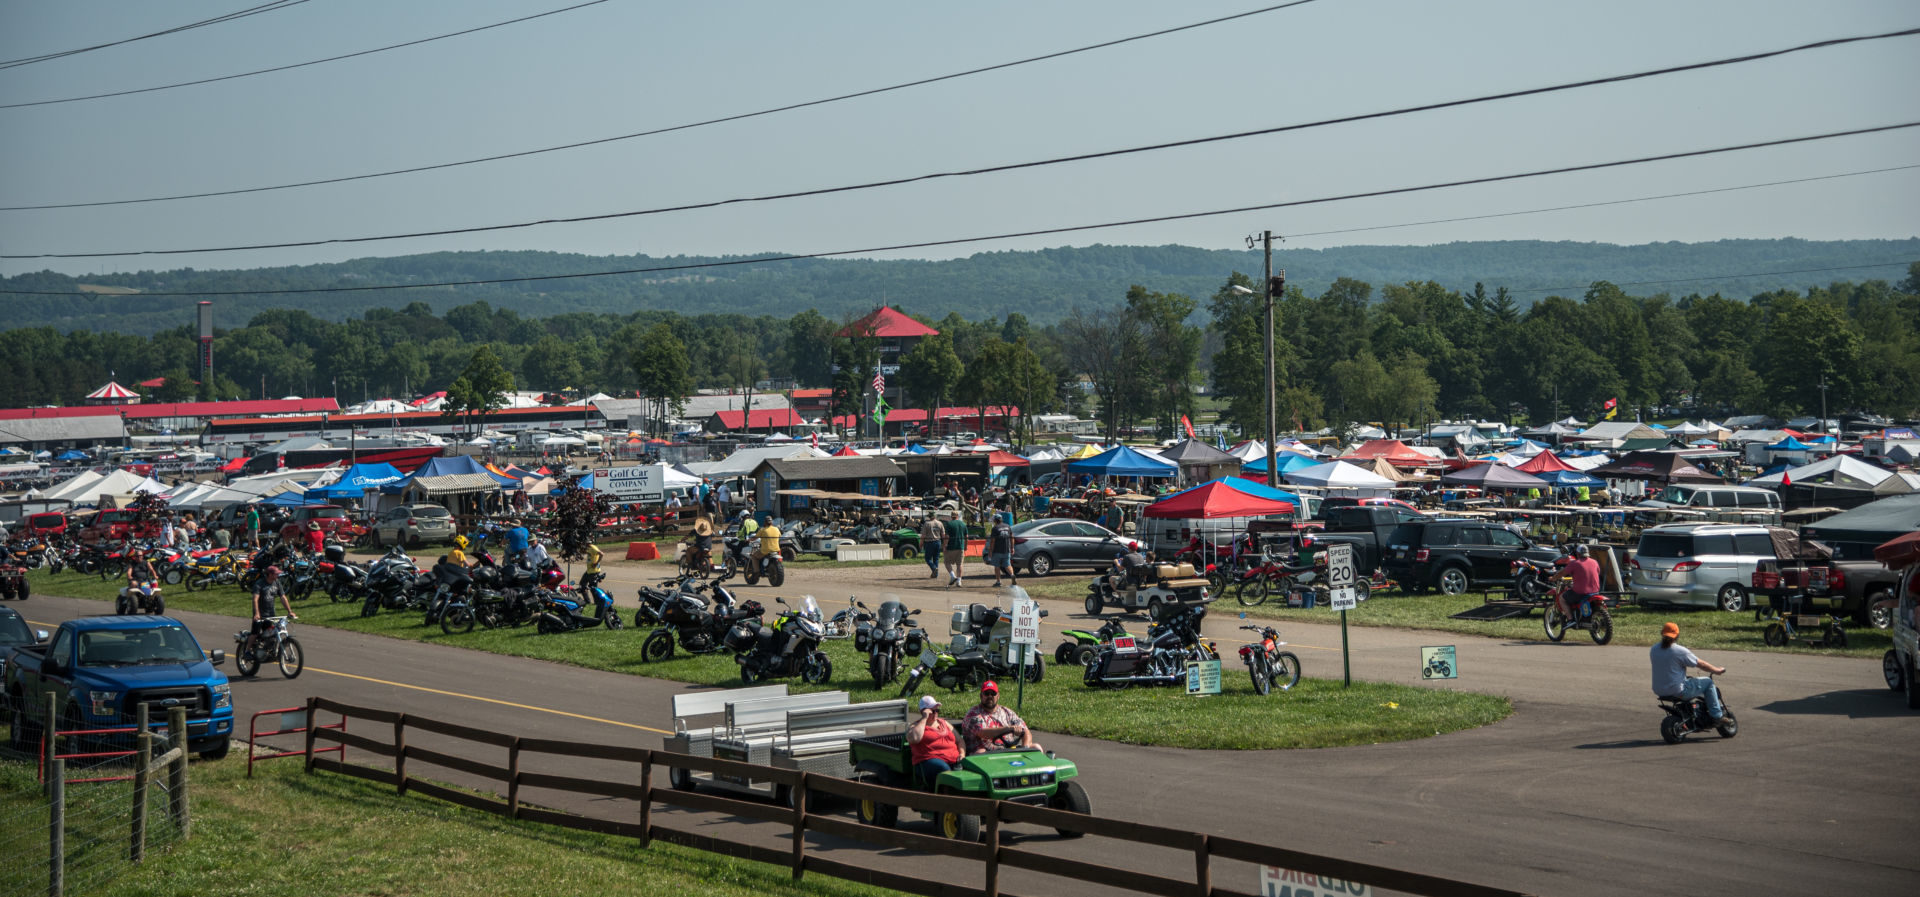 Registration Open For 2020 AMA Vintage Motorcycle Days At MidOhio